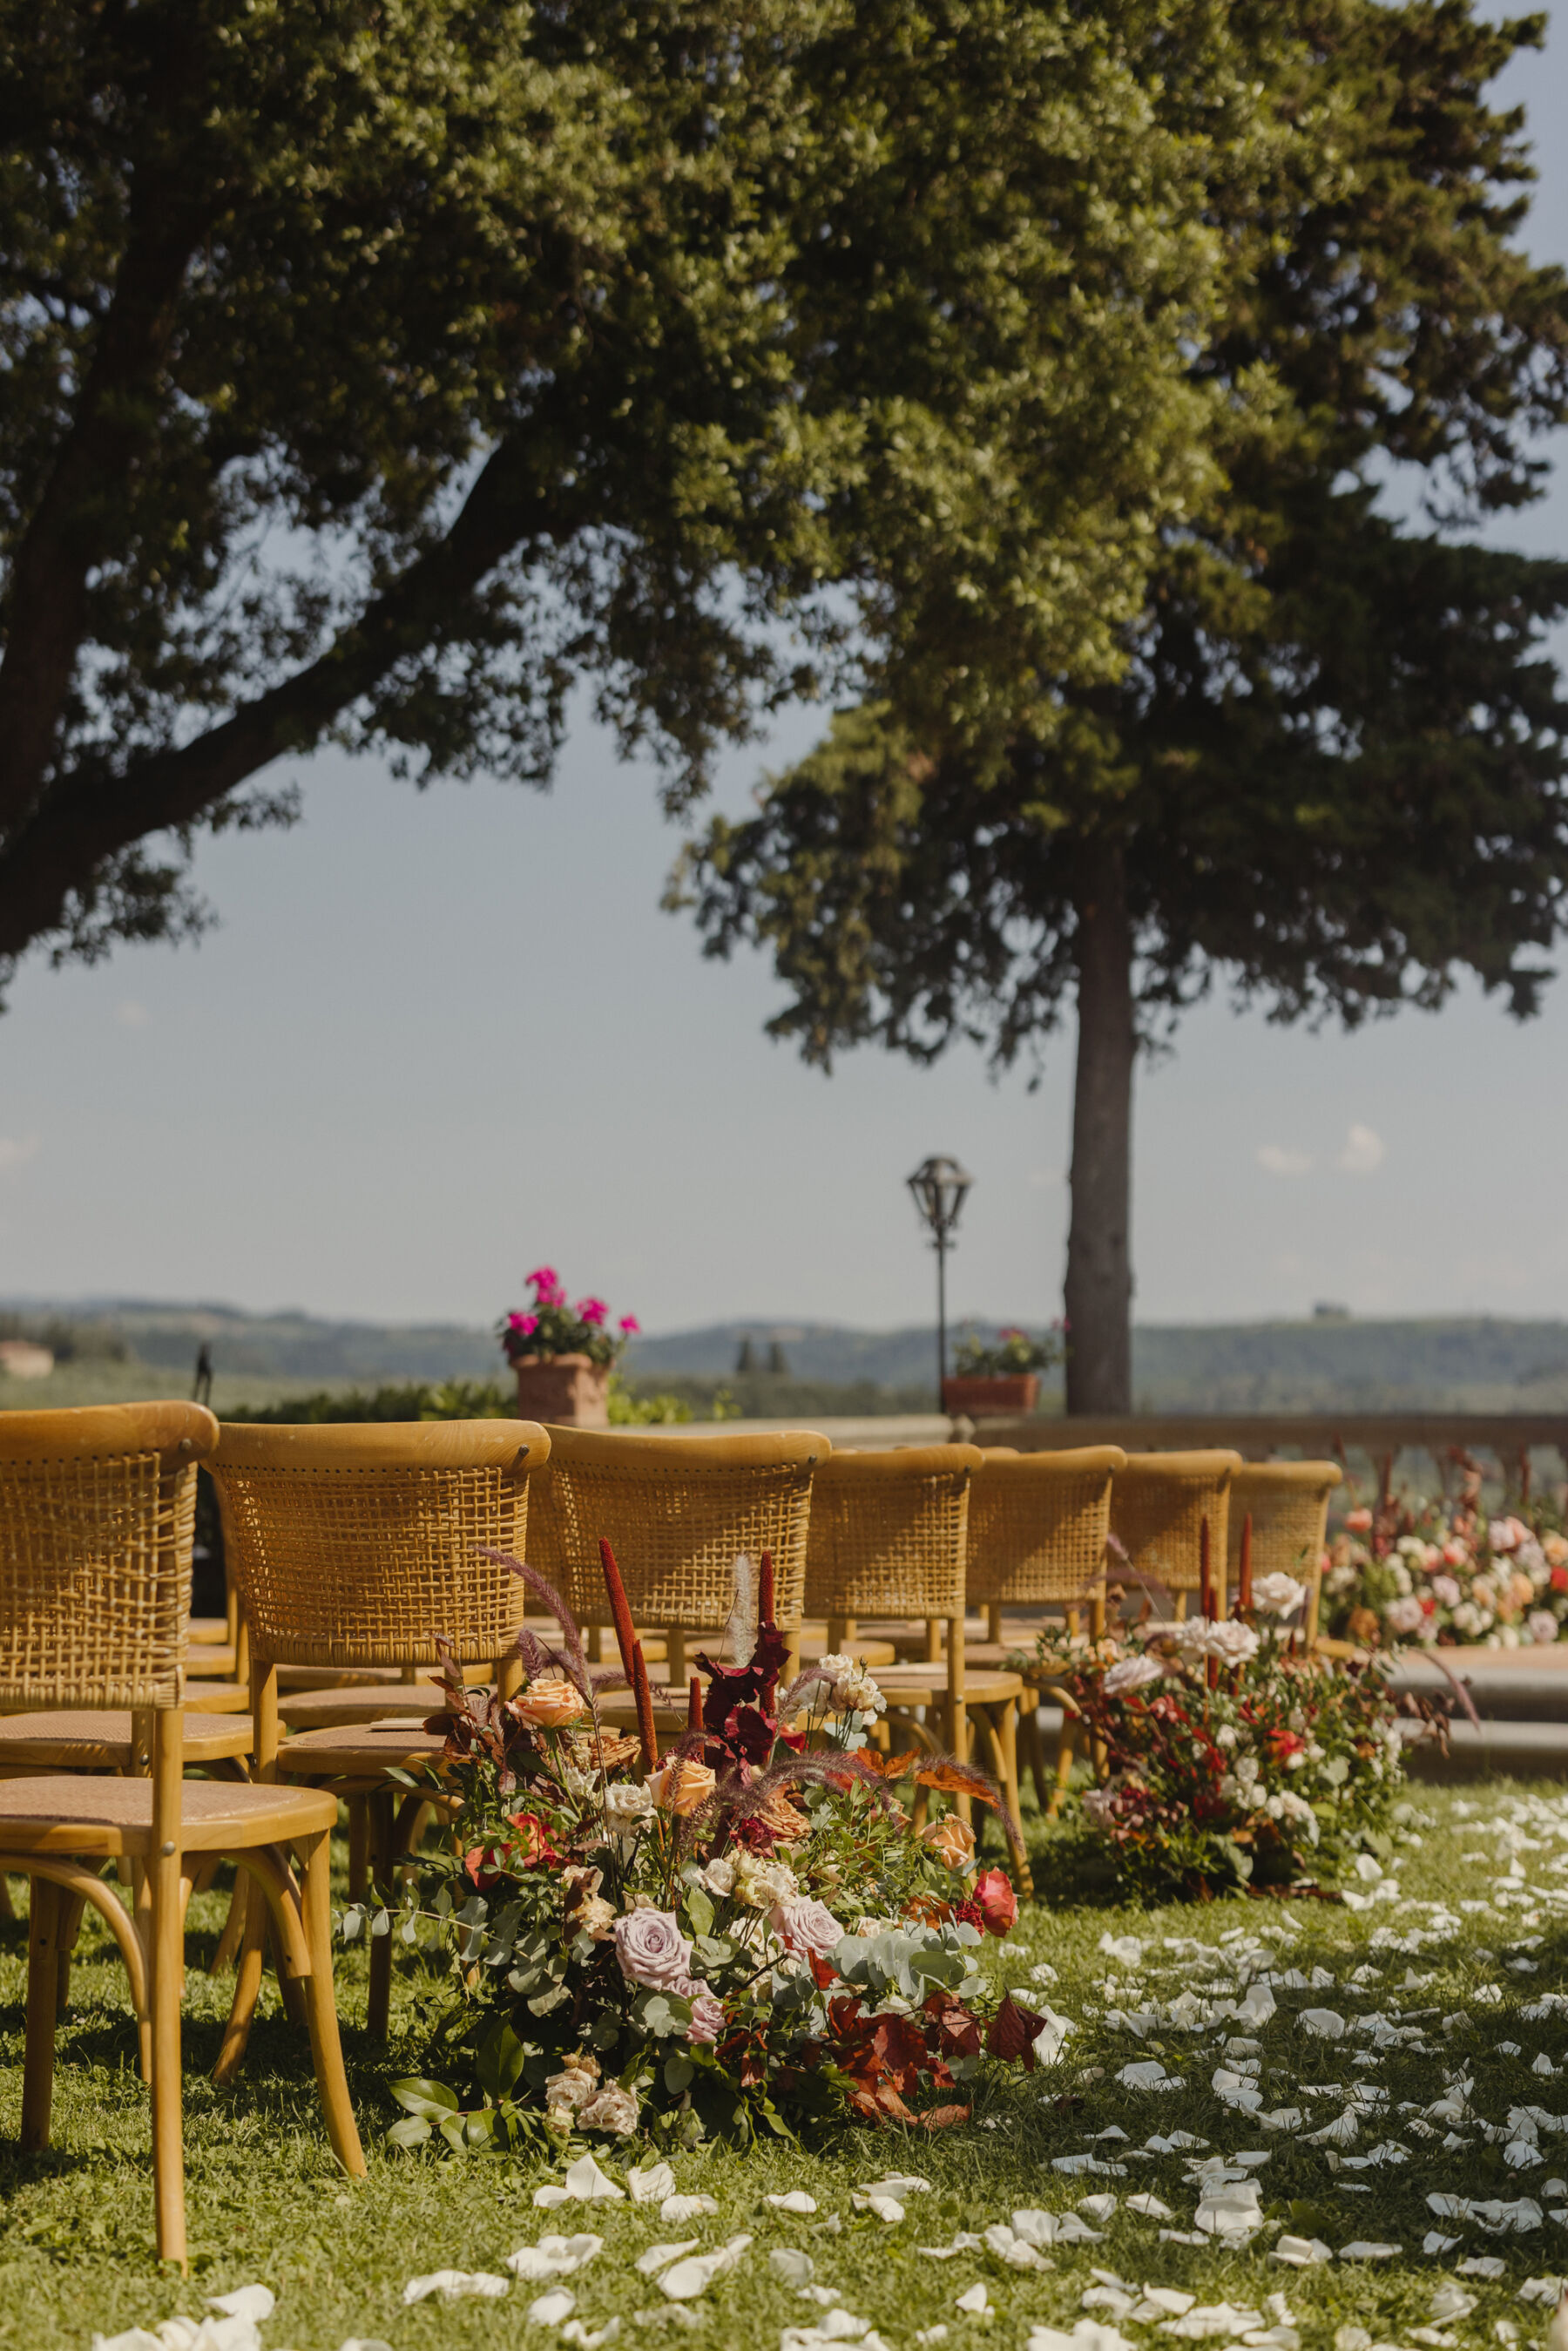 Outdoor wedding in Italy. The wedding aisle is strewn with rose petals and each other aisle end has a beautiful ground based floral installation.